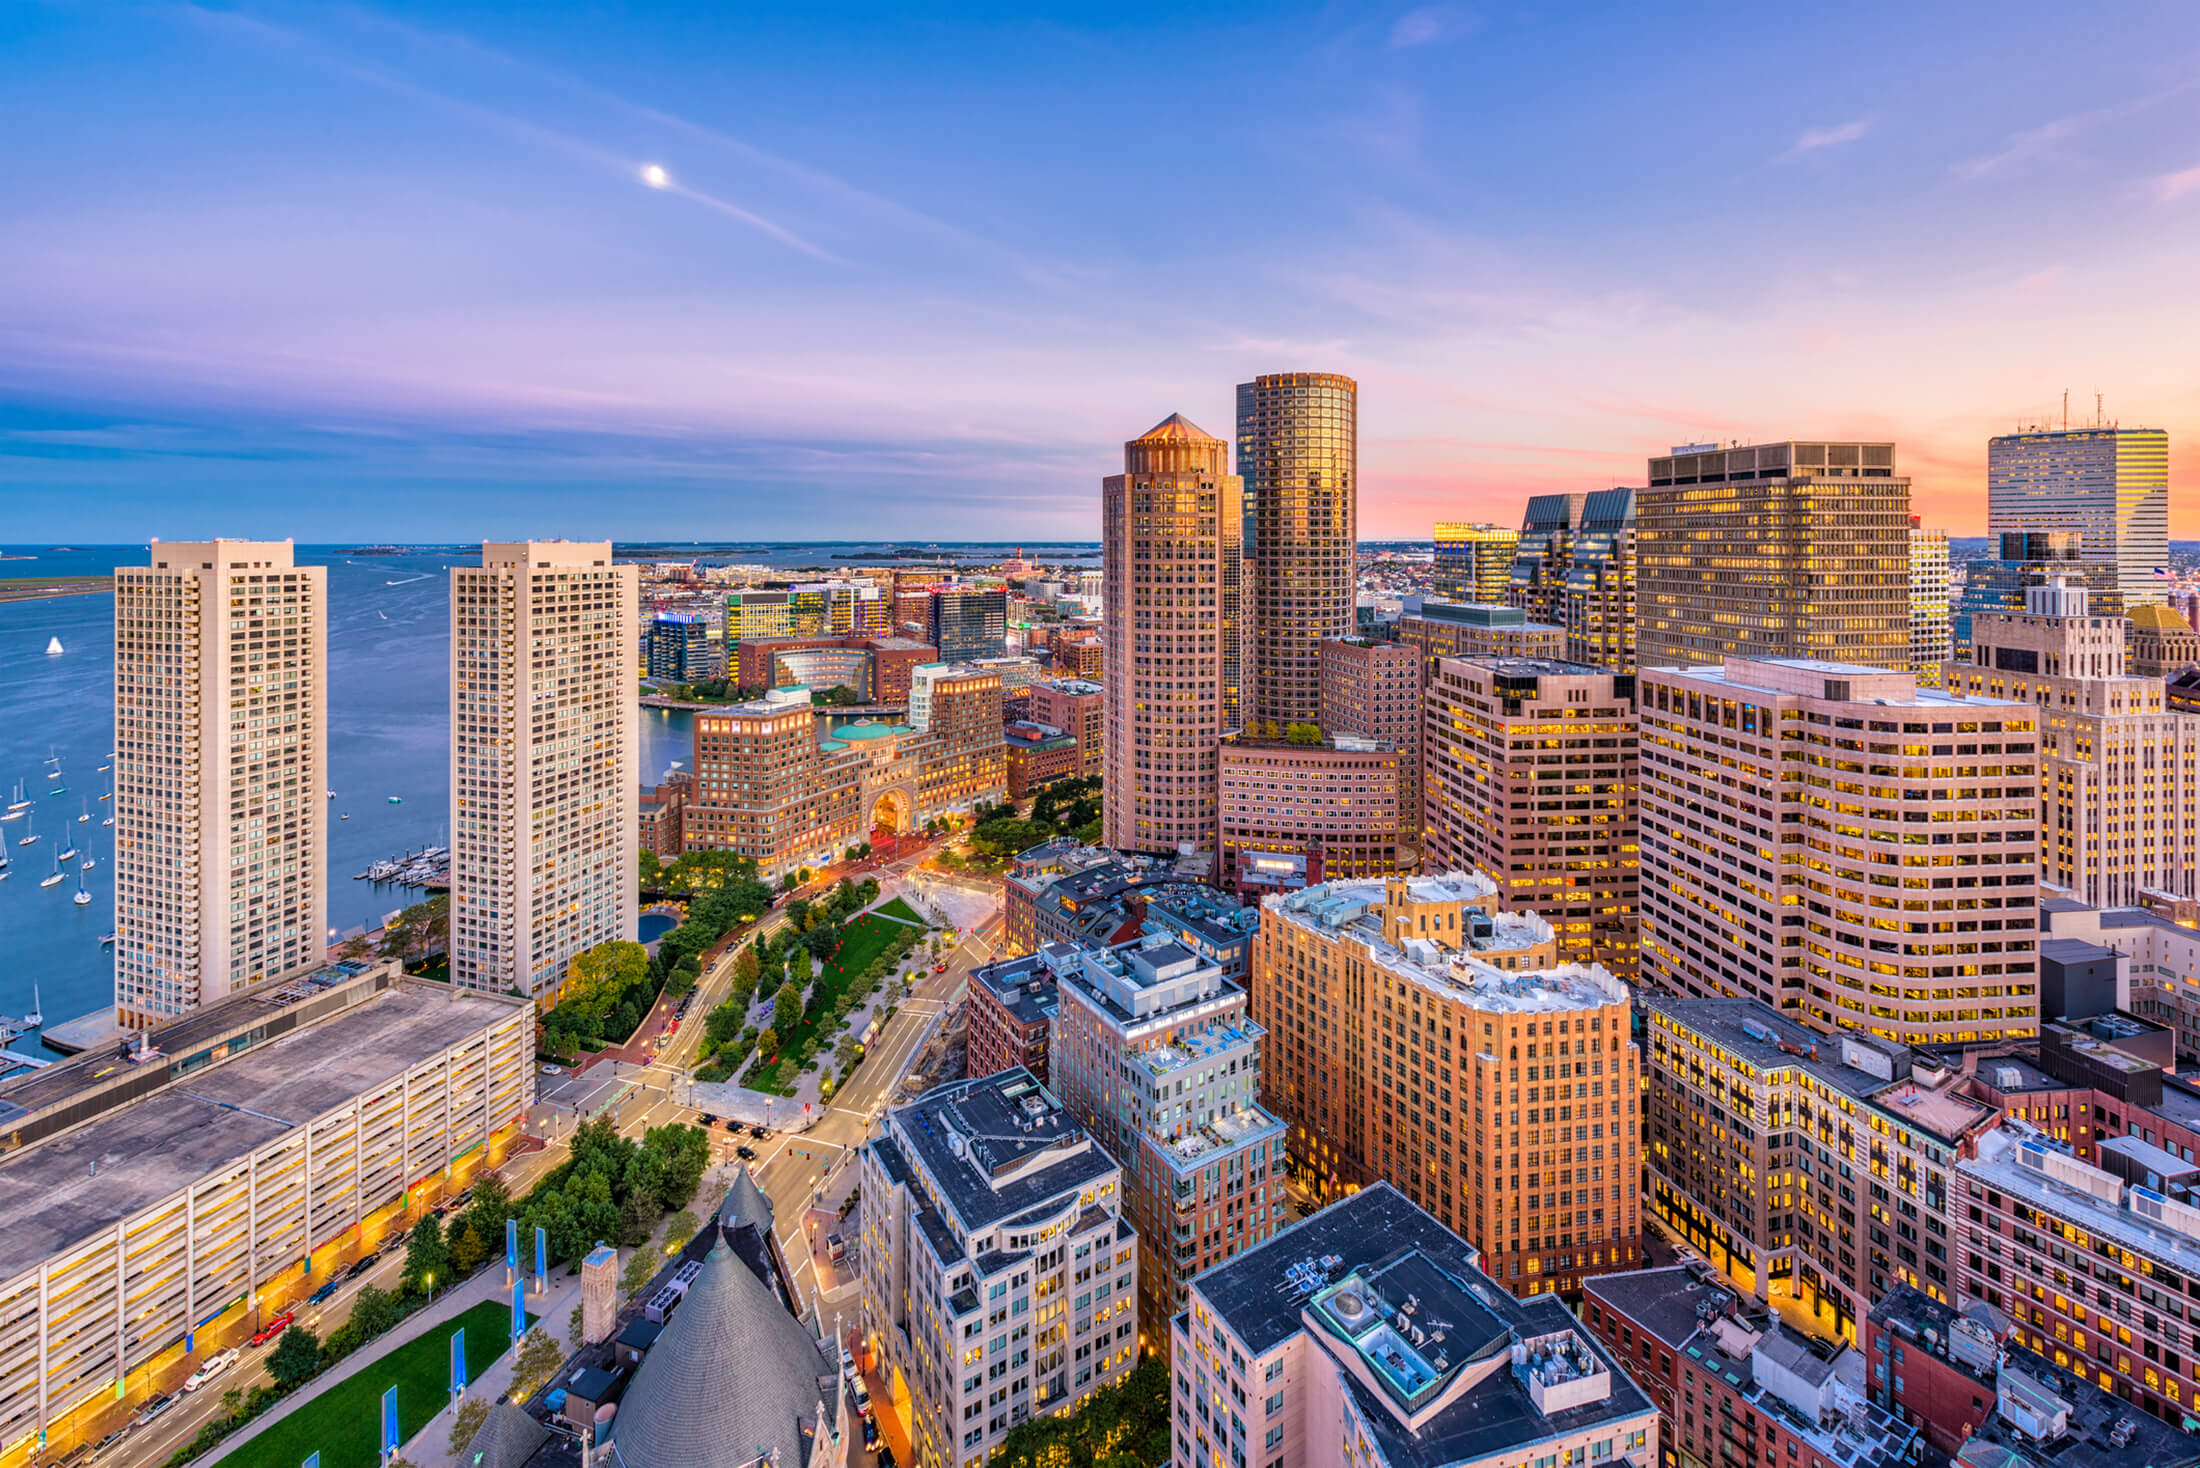 An aerial view of the Boston Financial District at sunset